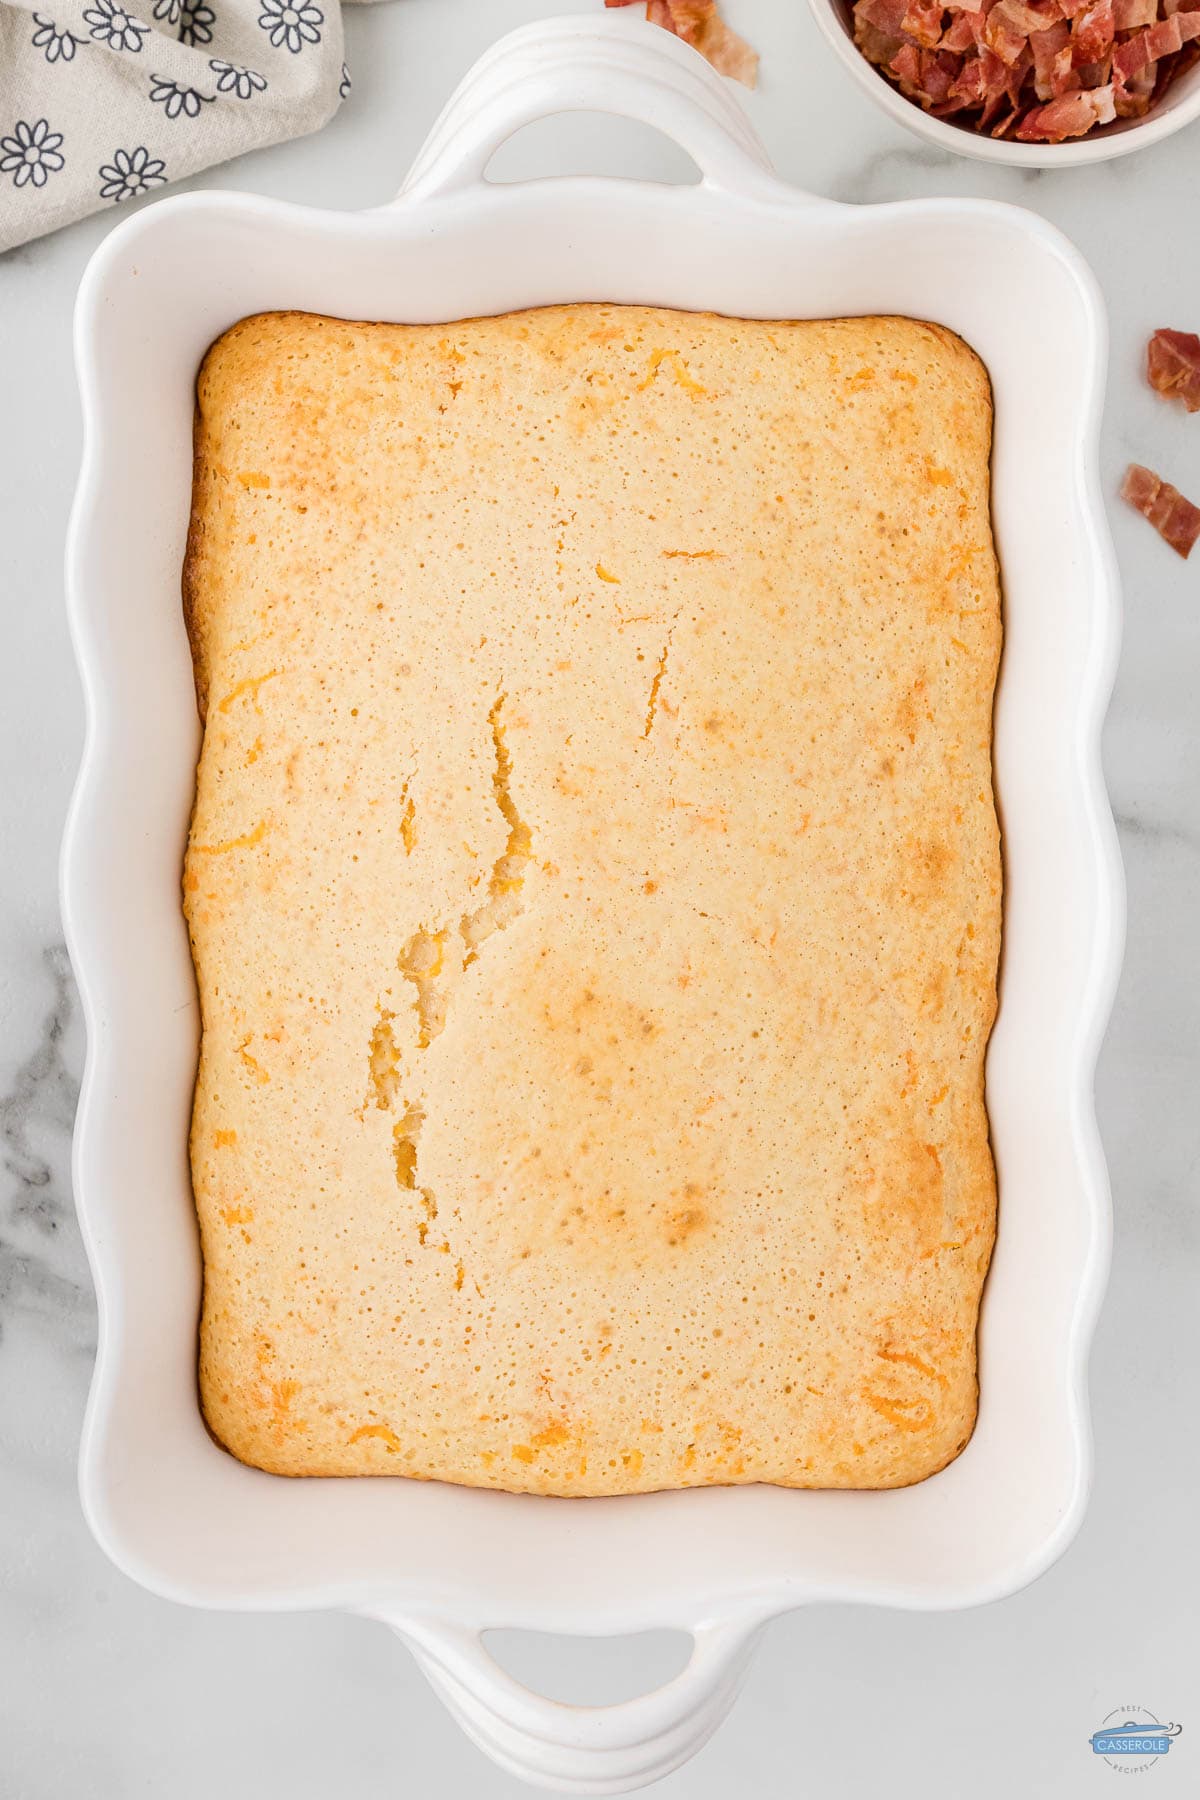 pancake casserole baked in a white dish